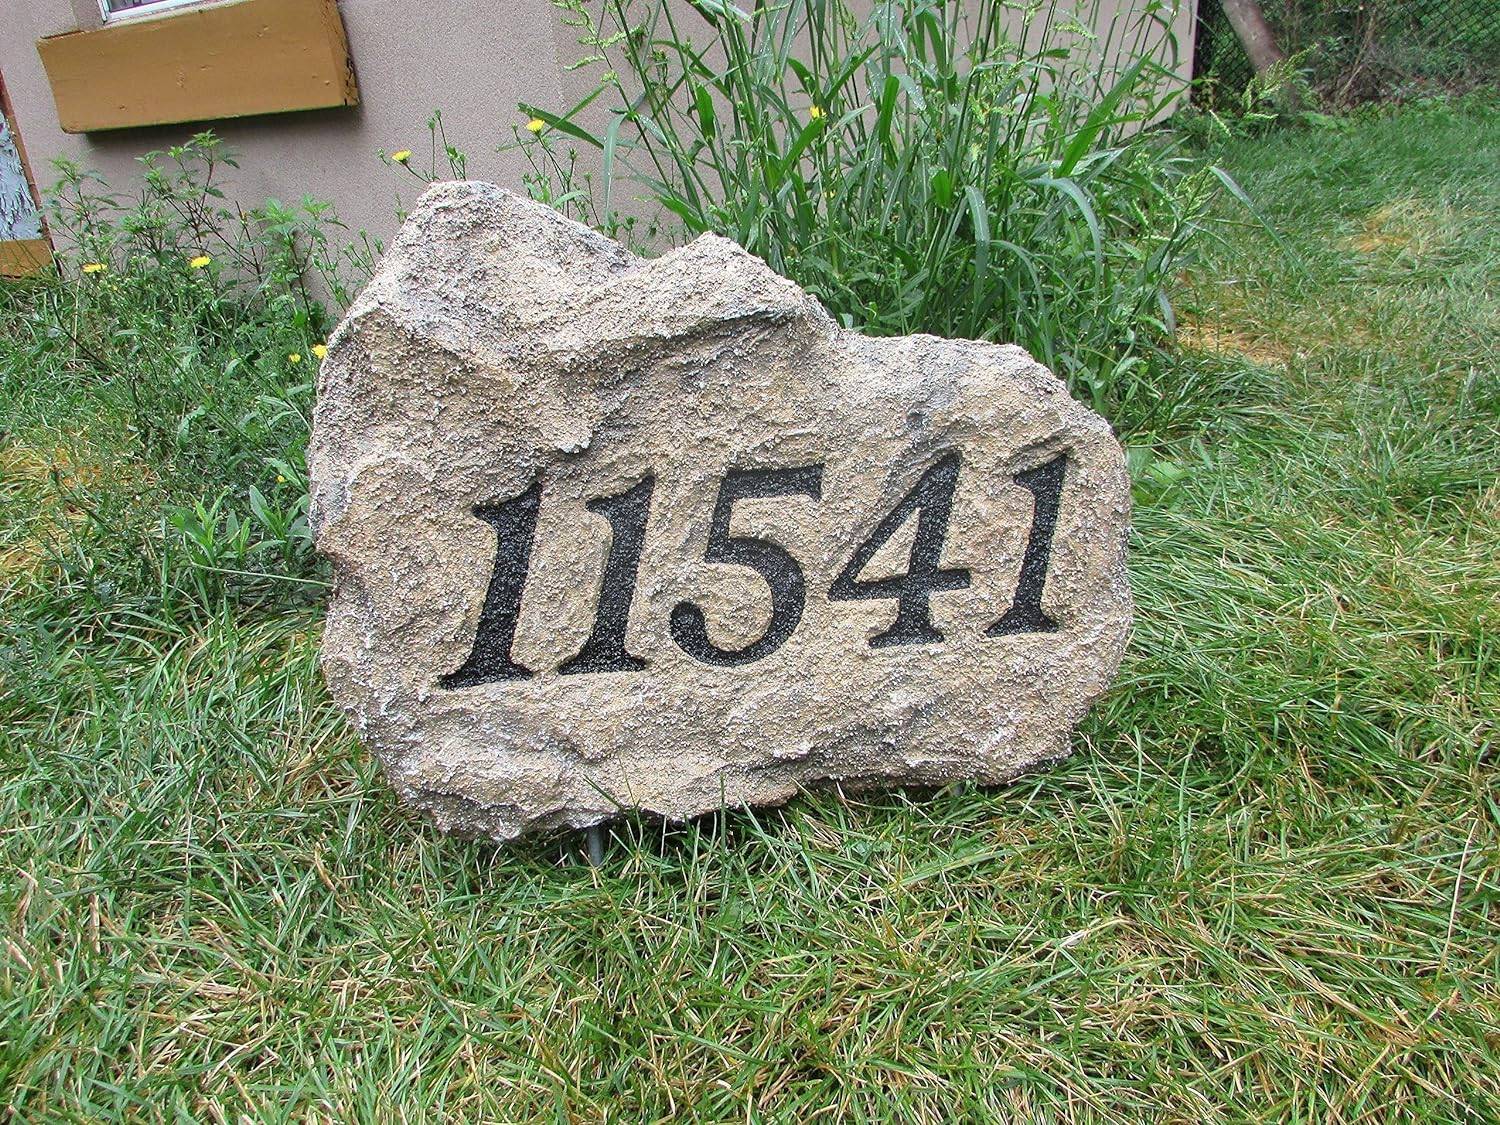 House number on a large stone.